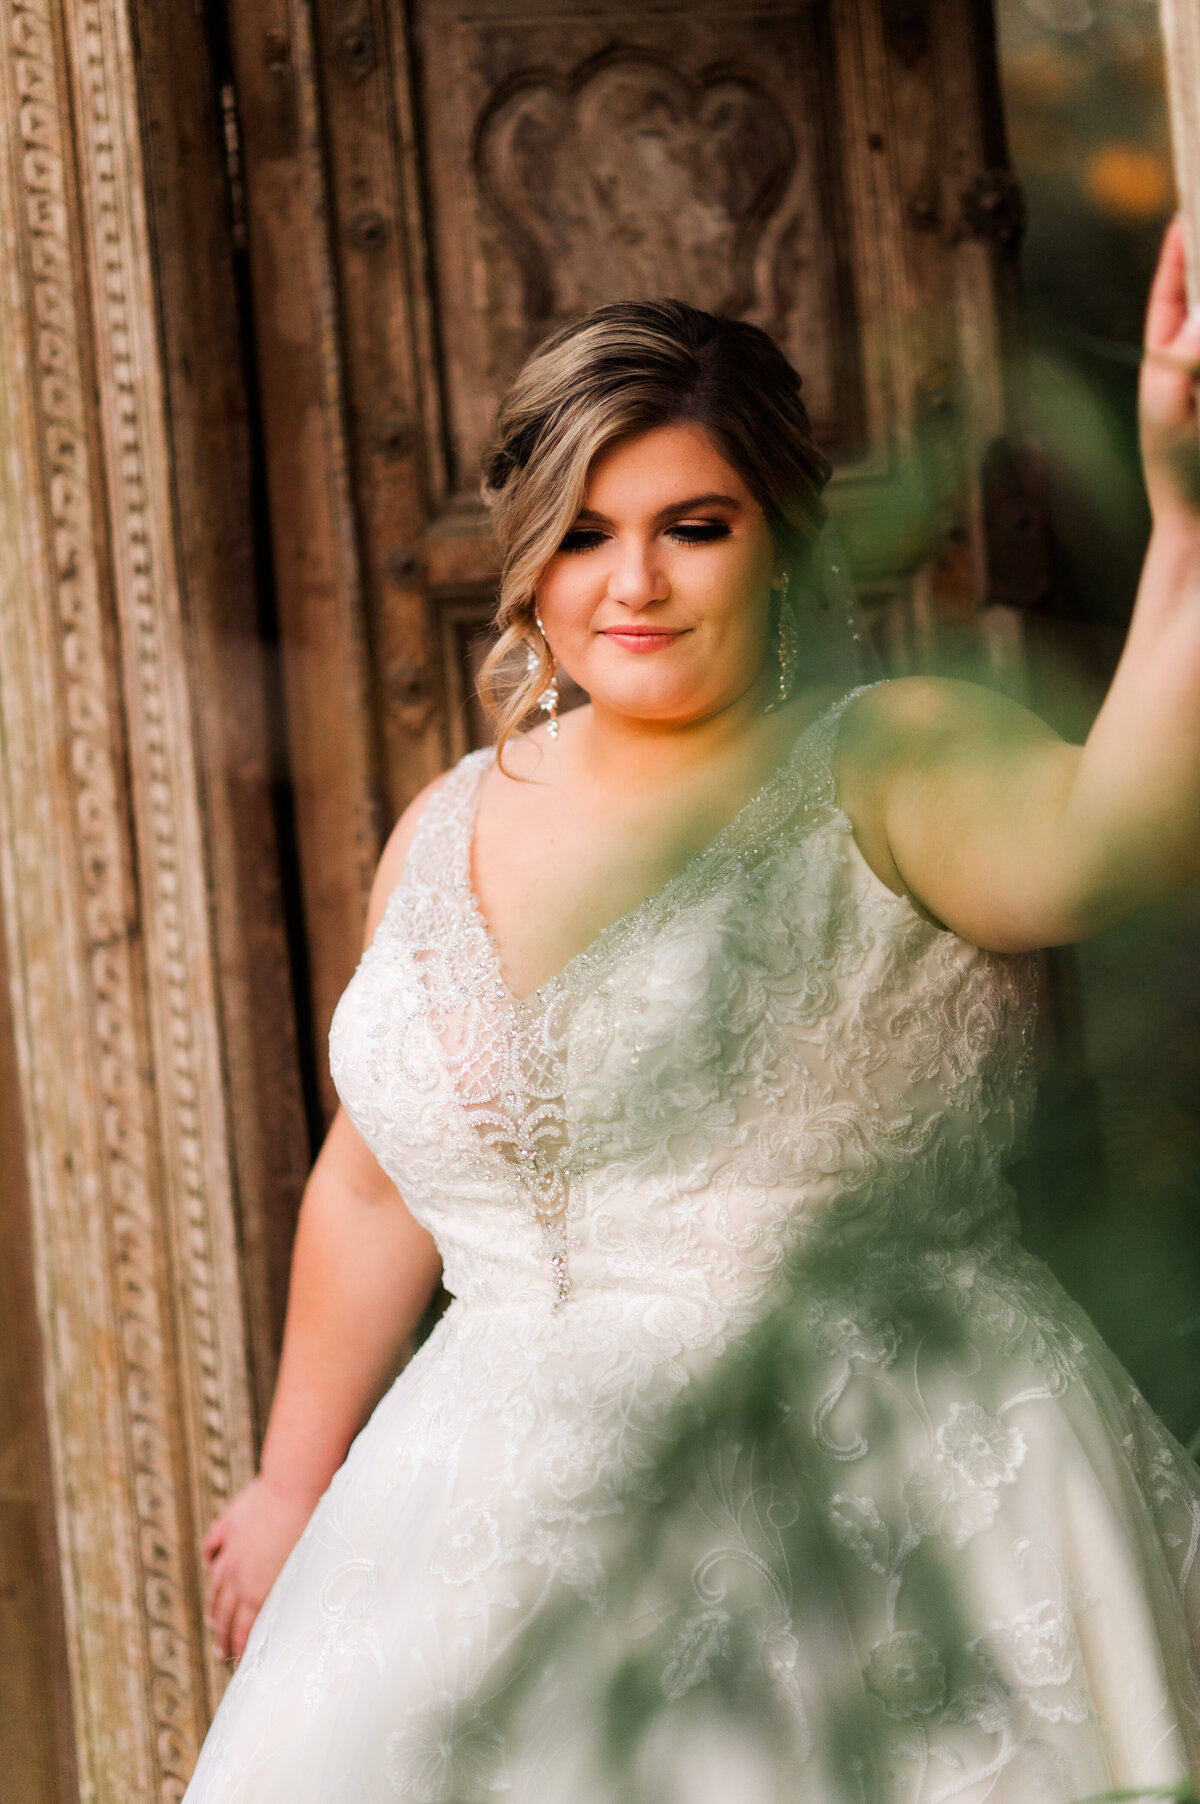 bride walking through an outdoor stone gate while holding onto the sides of the doorway and looking down captured by little rock wedding photographer